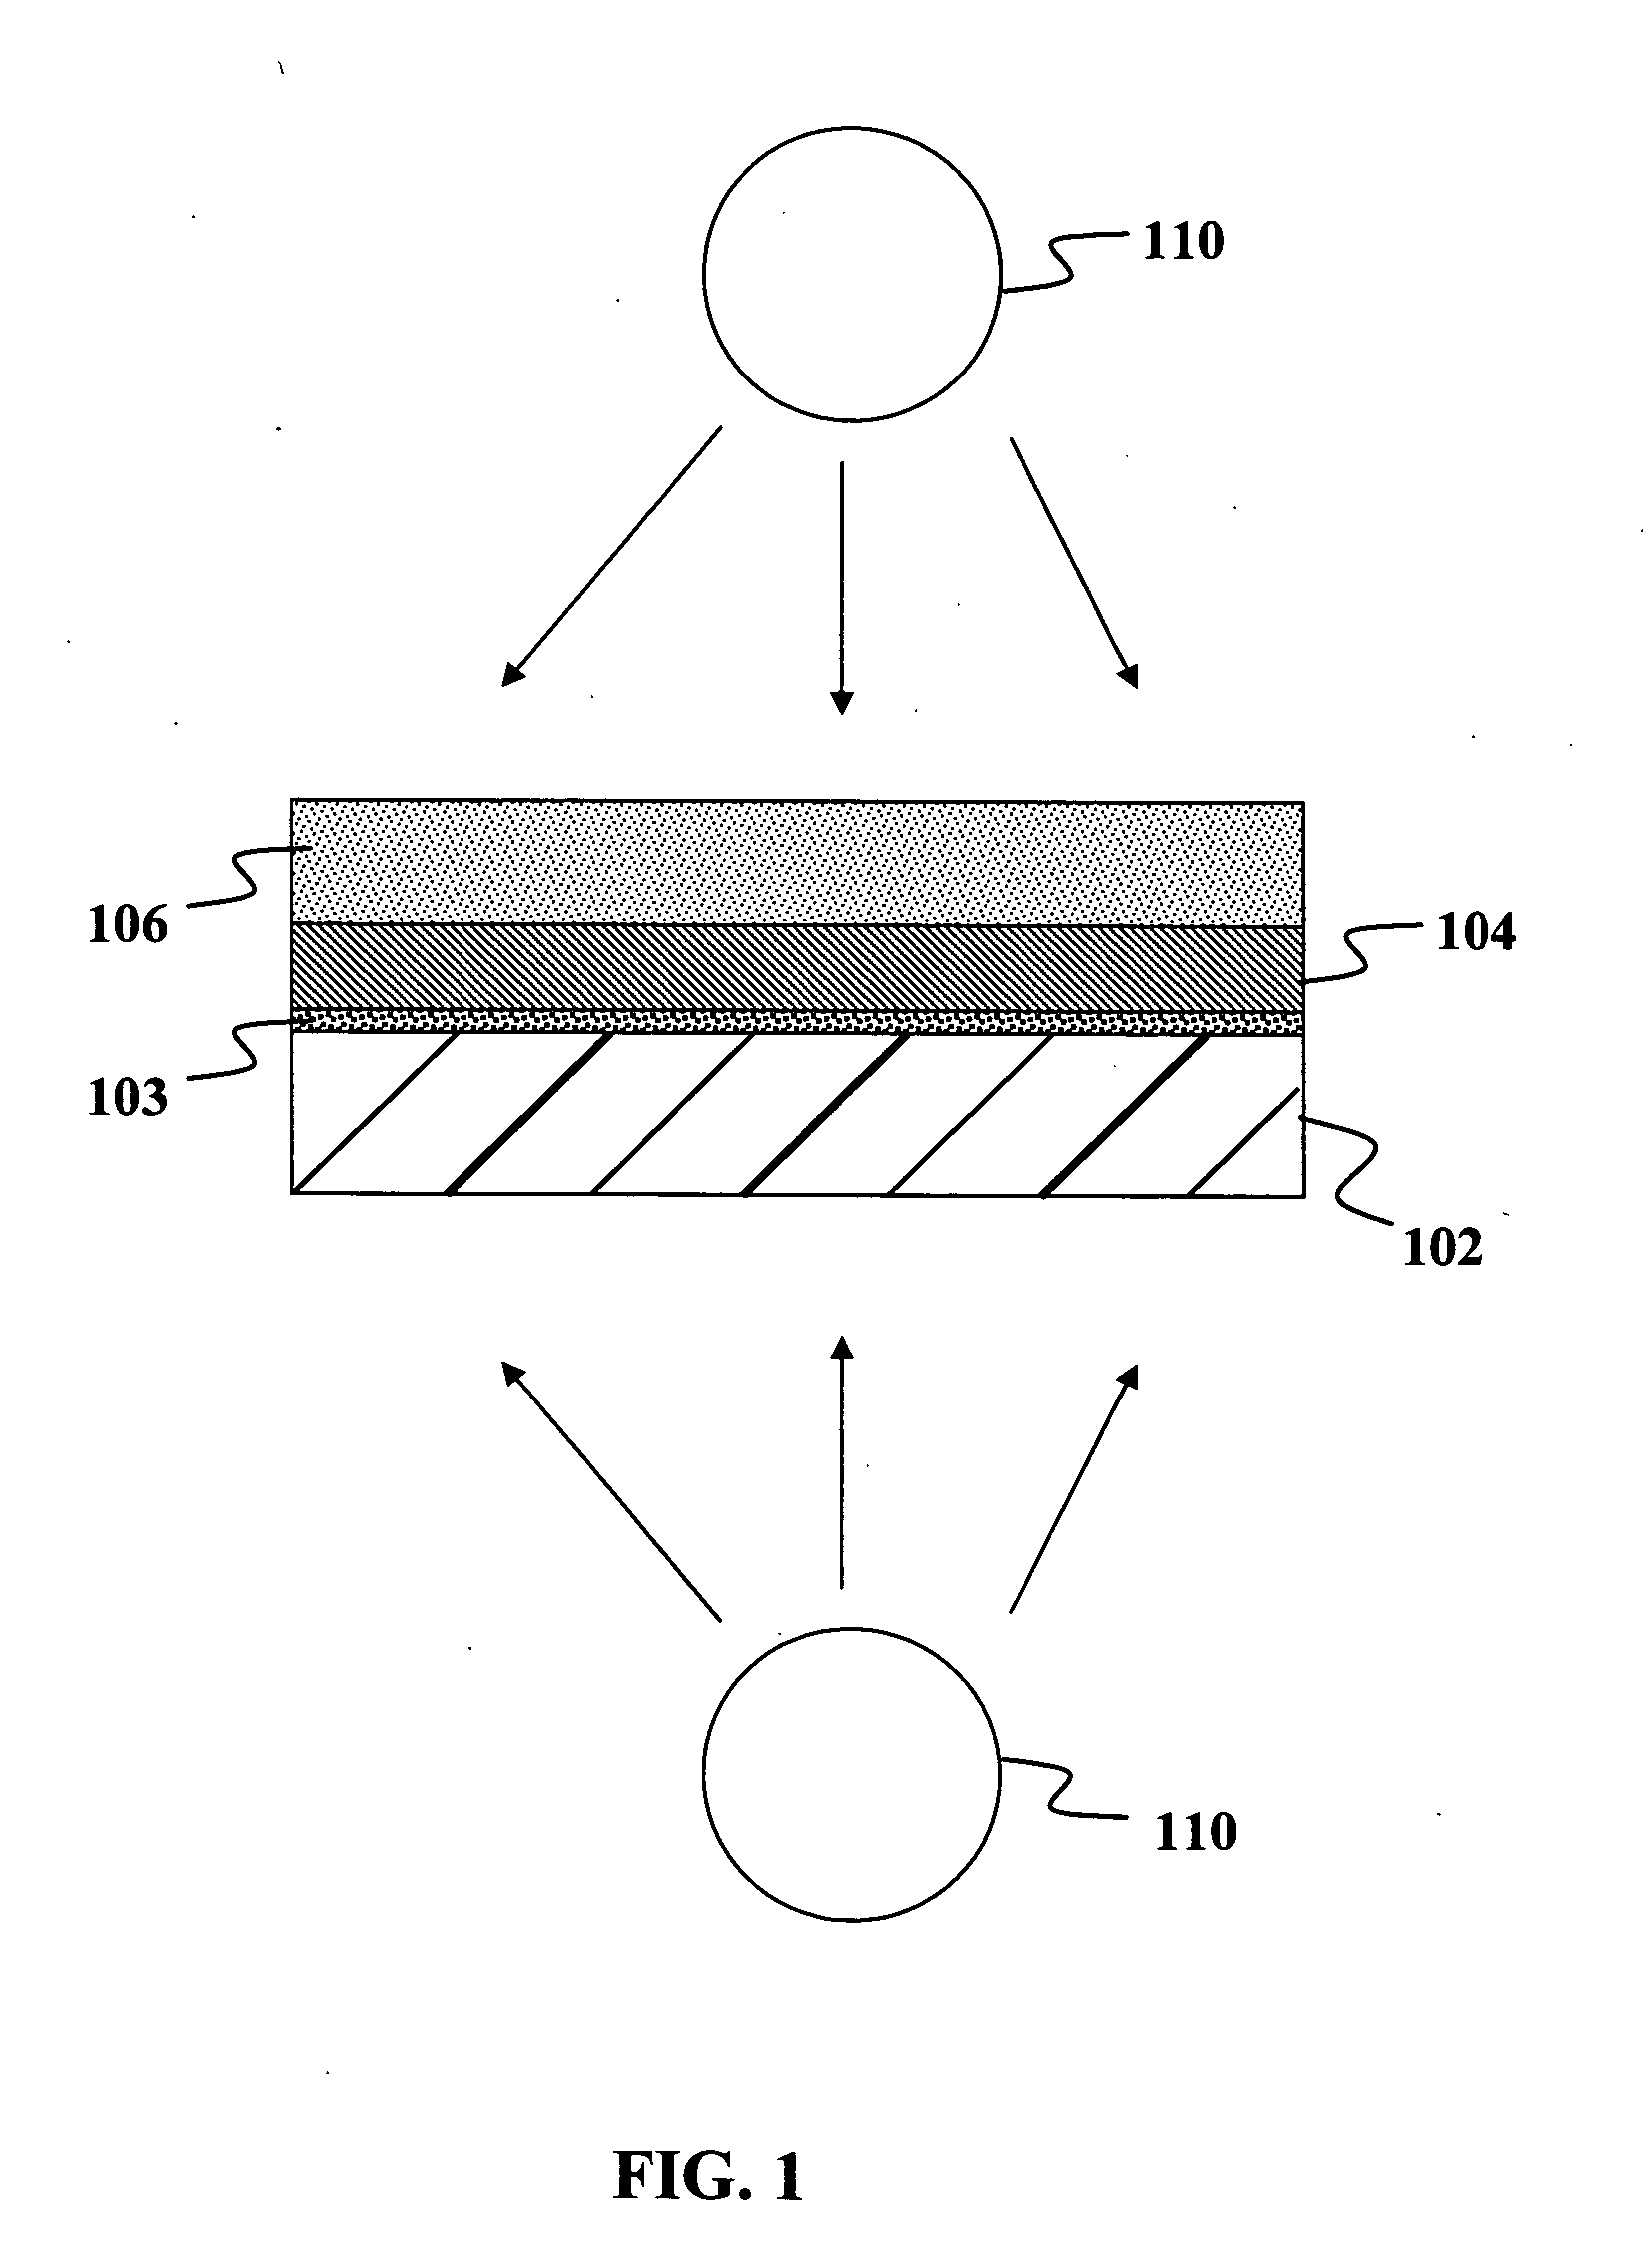 Formation of solar cells on foil substrates